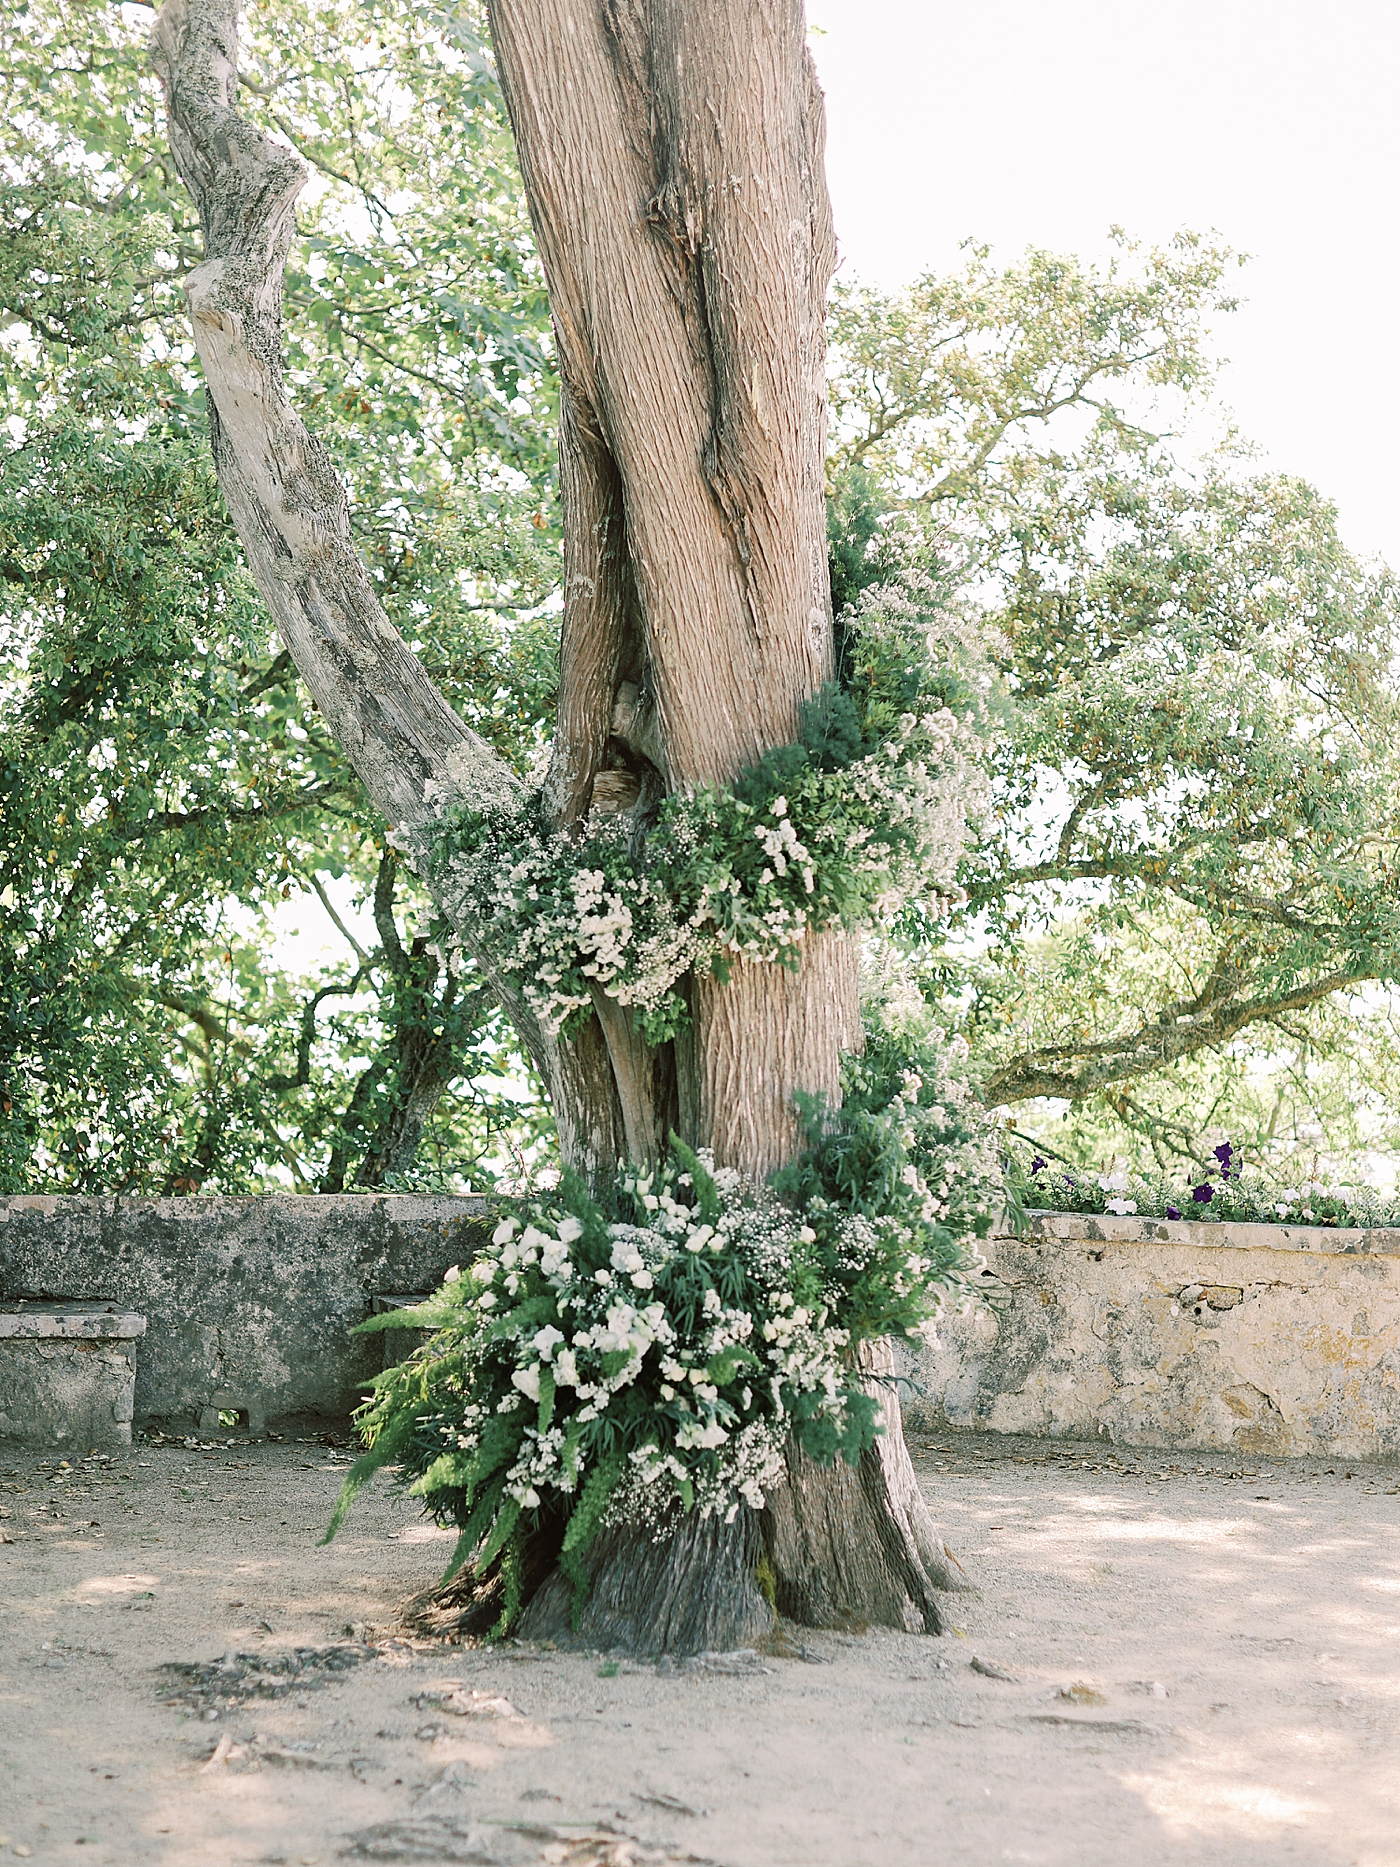 Wedding ceremony location with flowers around a tree | Image by Diane Sotero Photography